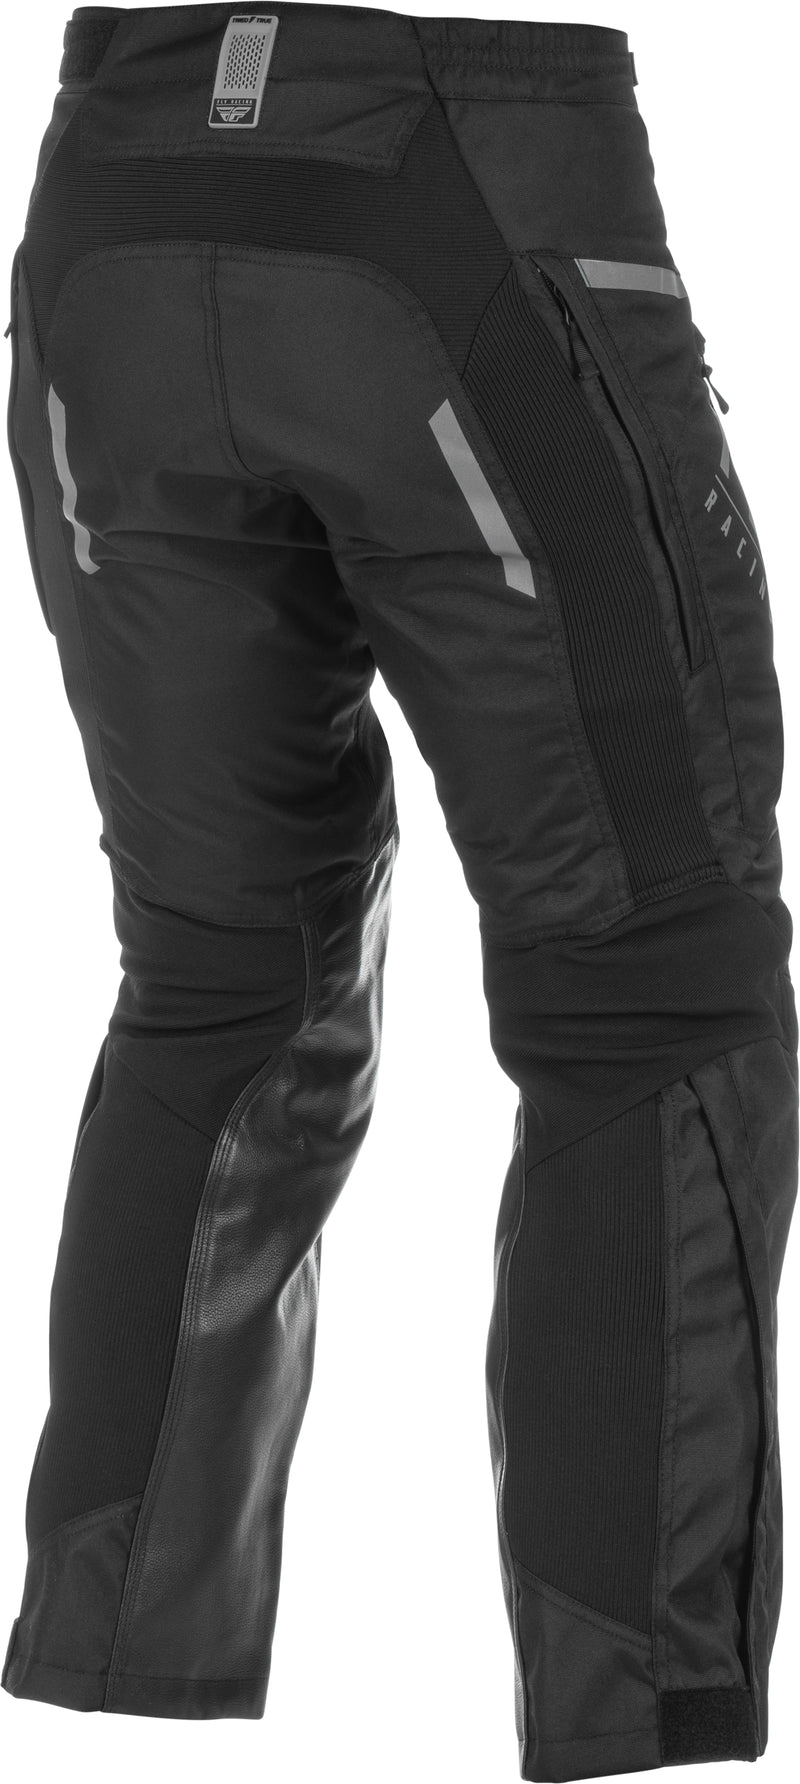 Fly Racing Adult Patrol Over-Boot Pants